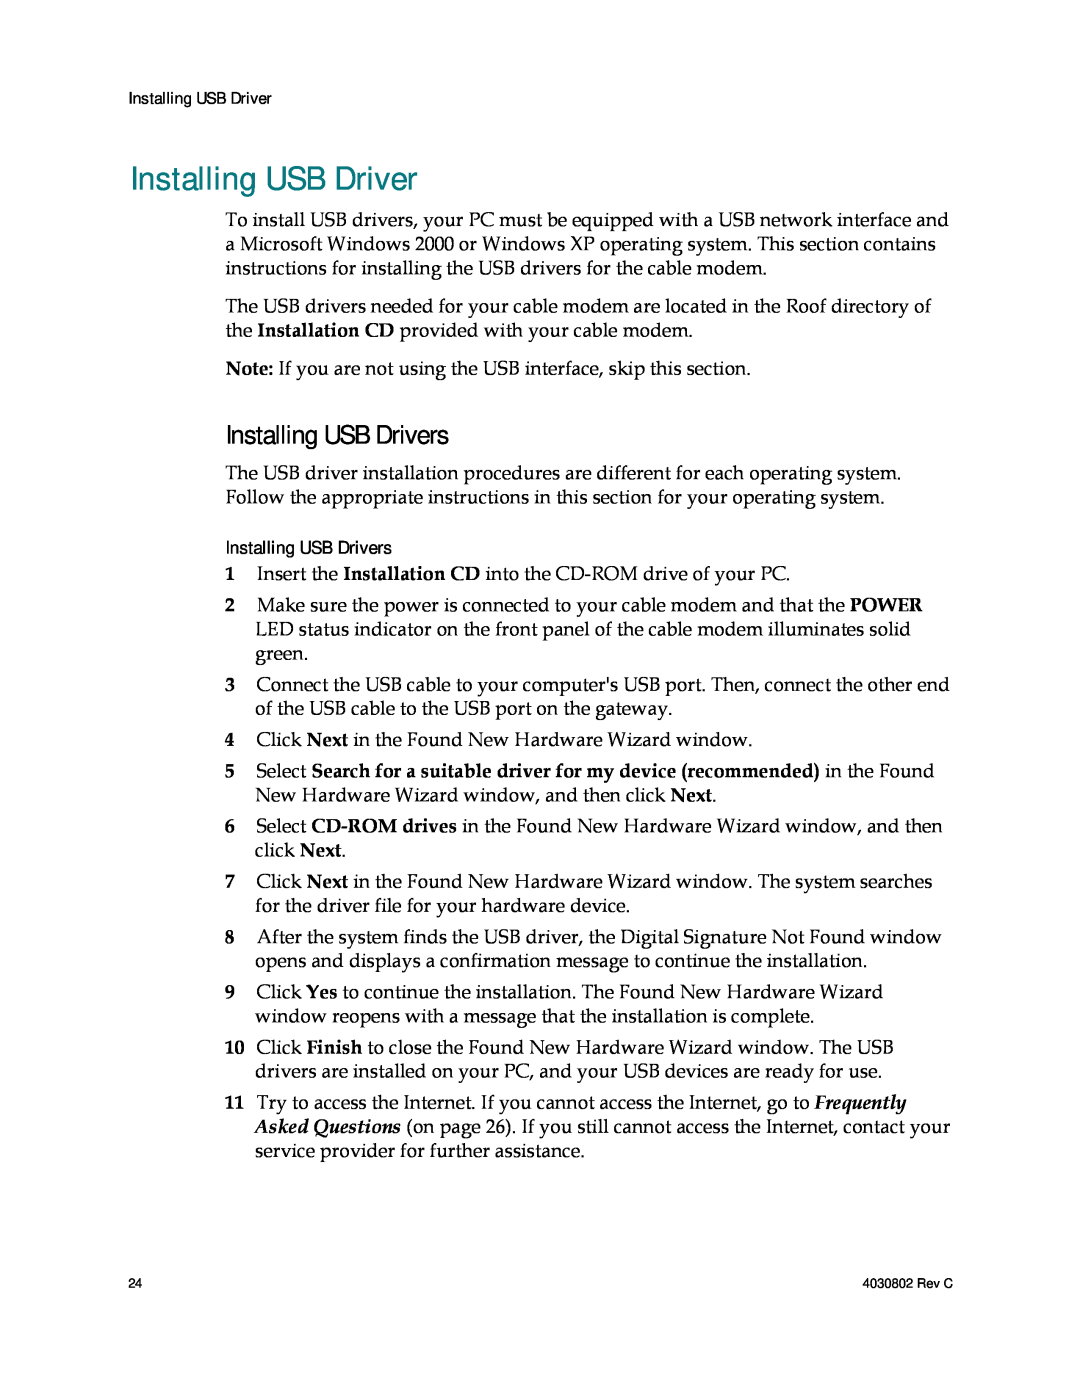 Cisco Systems 4027668, AAC400210112234 important safety instructions Installing USB Drivers 